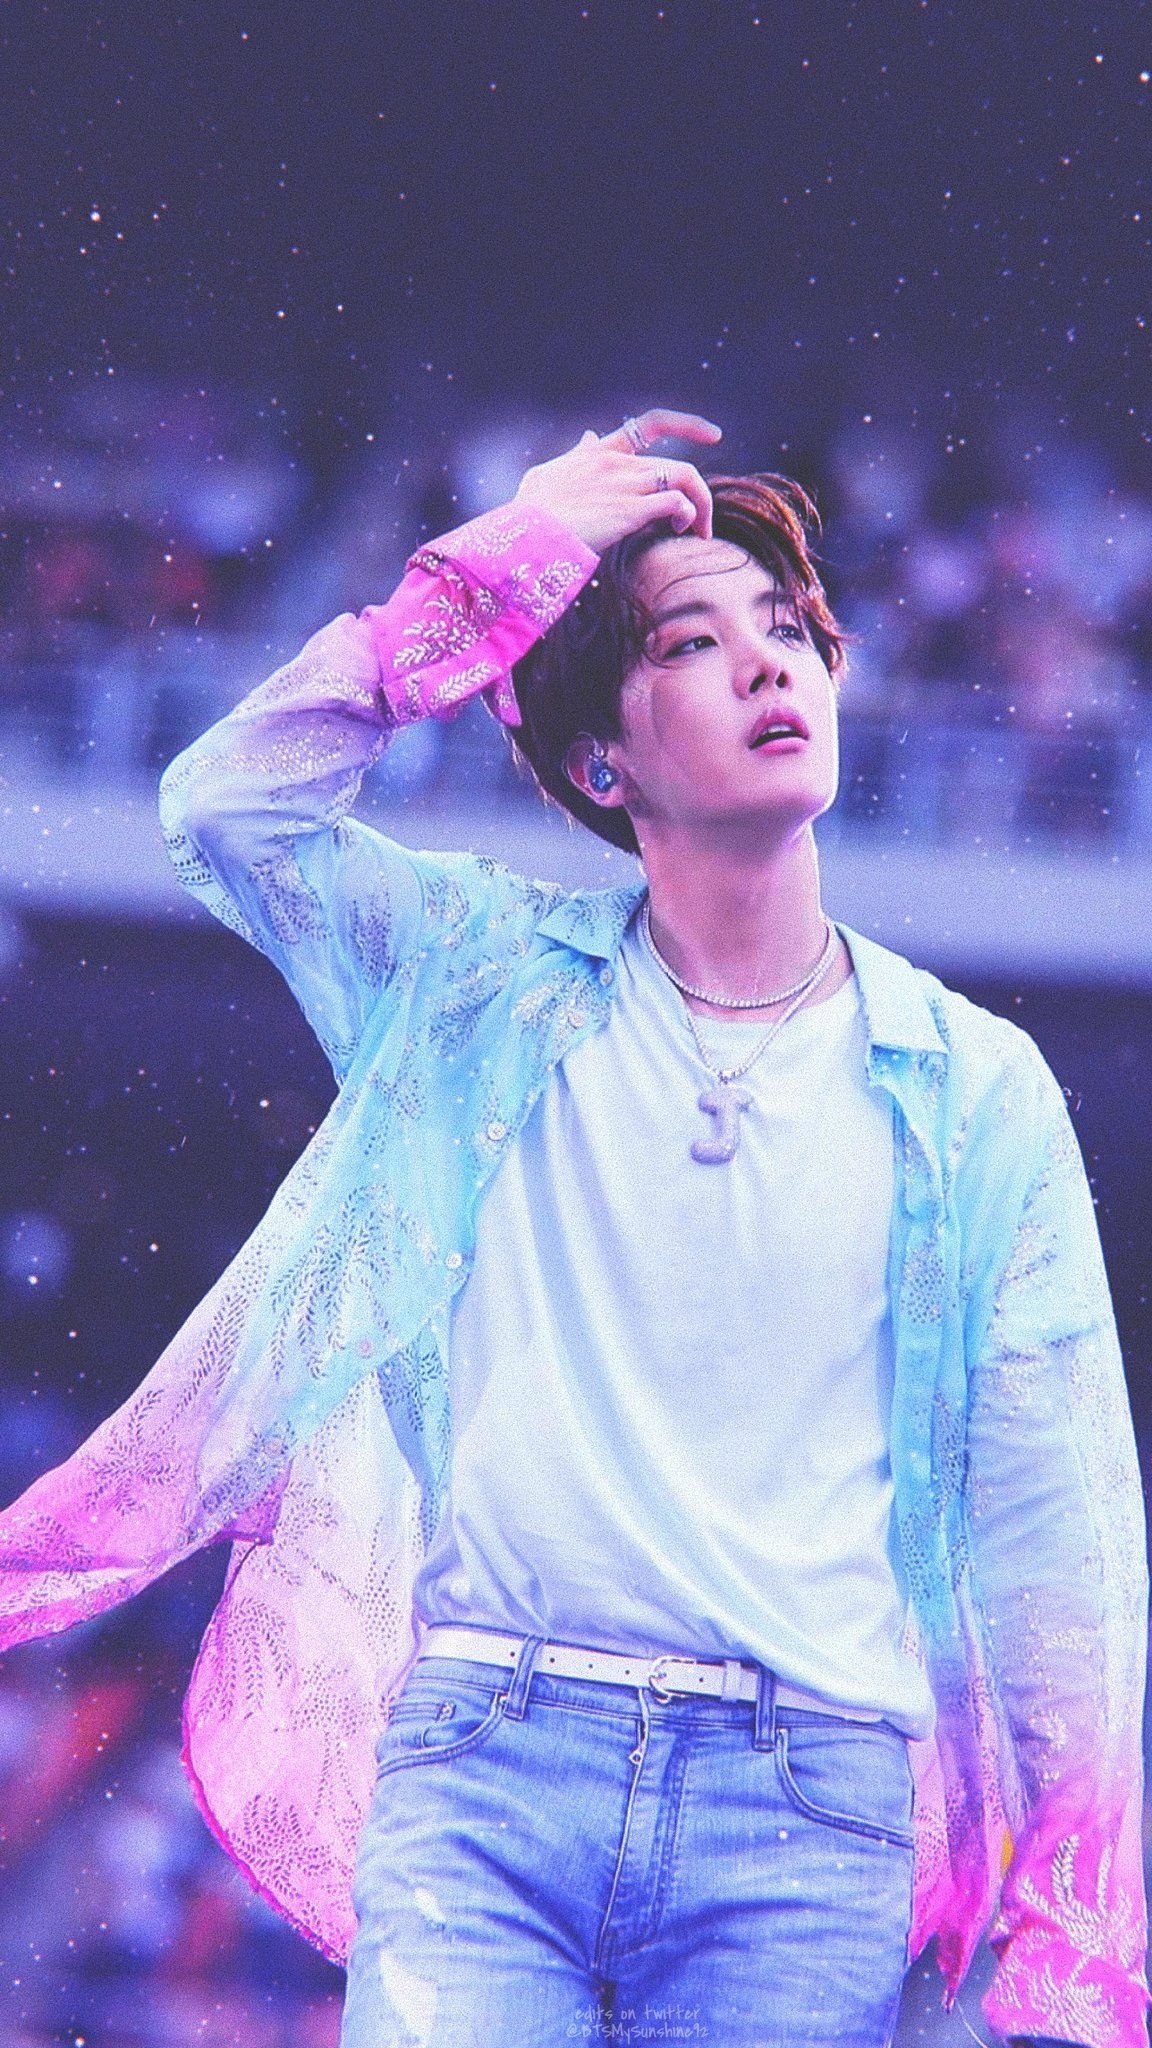 Bts Jhope Aesthetic Wallpaper Download | MobCup